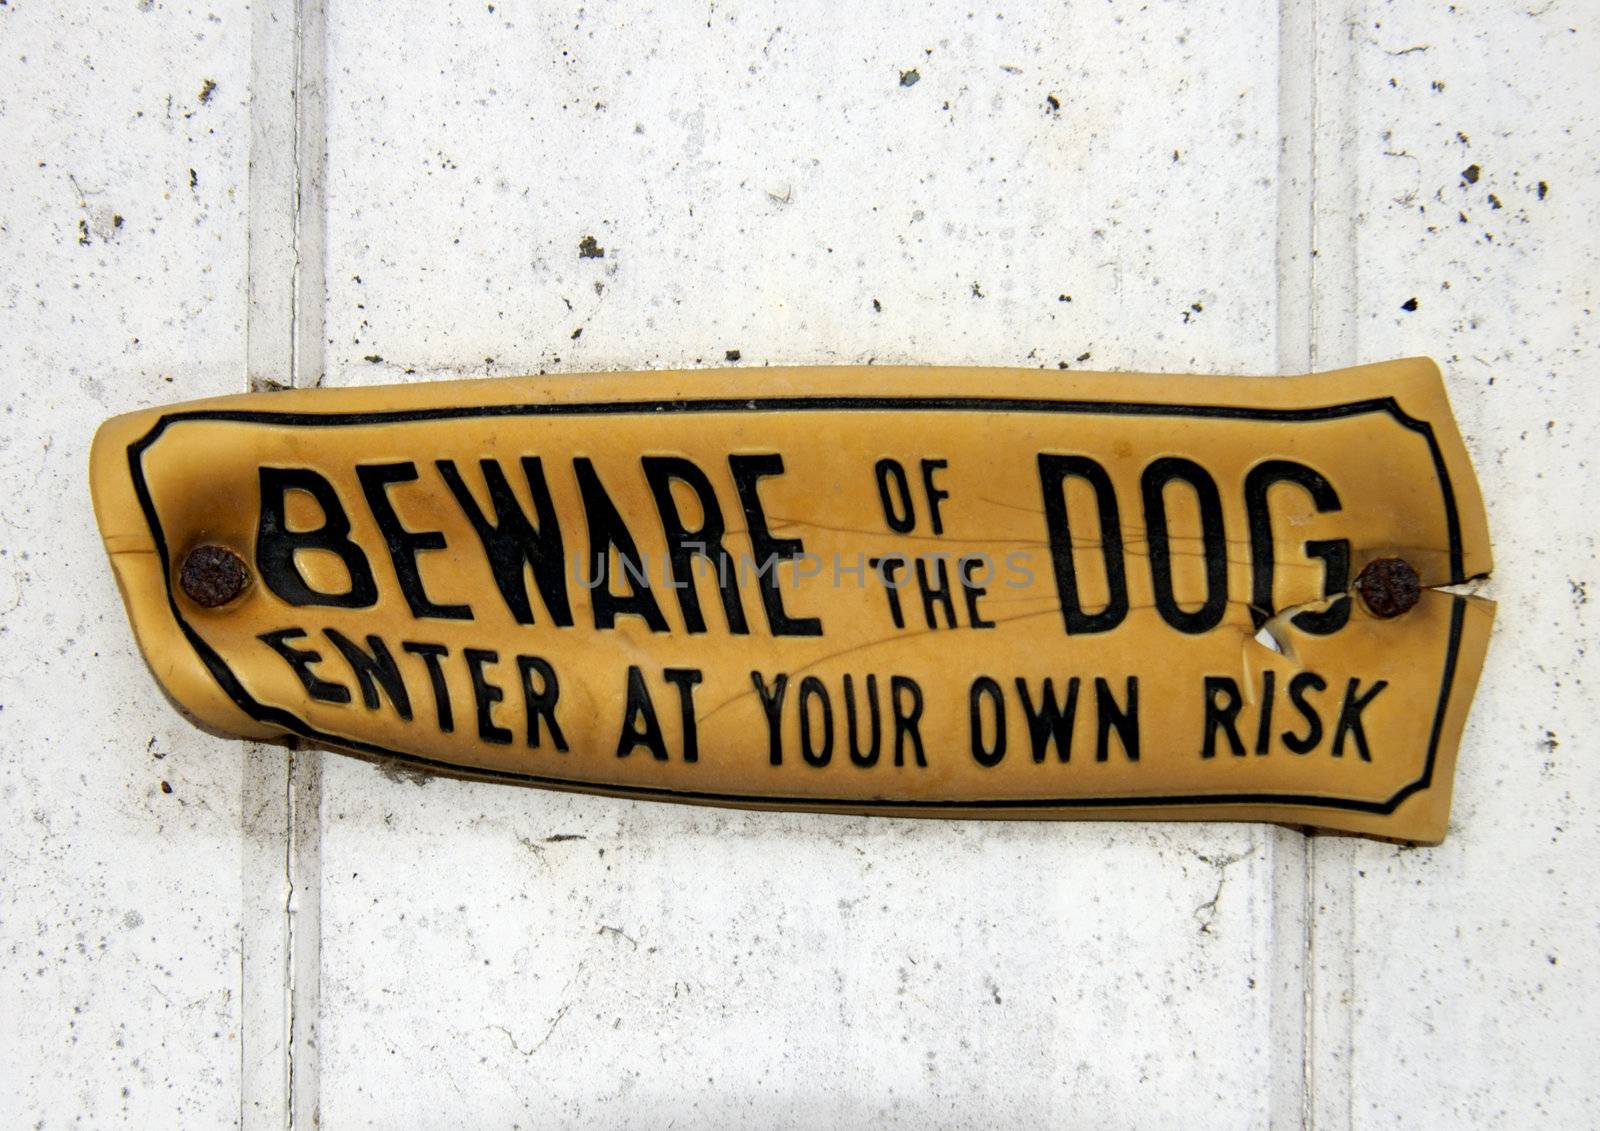 Beware of the Dog (with clipping path) by Bateleur